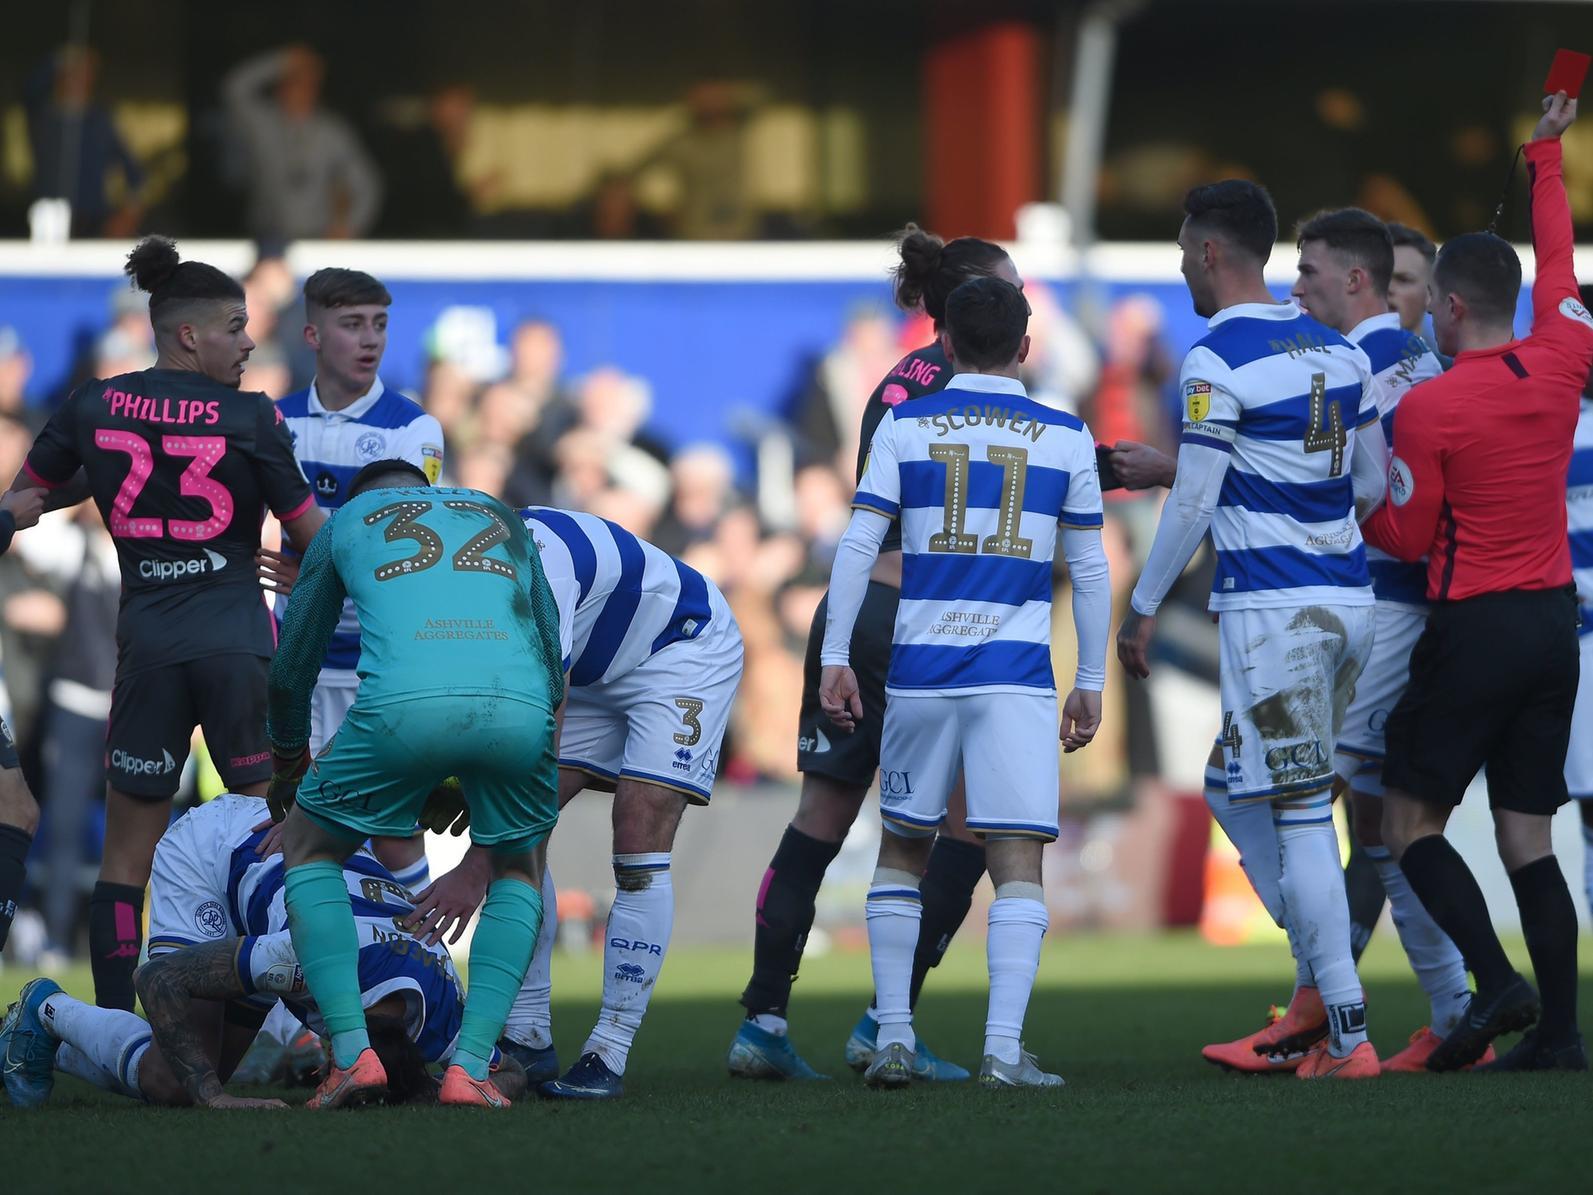 Kalvin Phillips saw red for a challenge on Geoff Cameron, which Sky Sports pundit Danny Higginbotham described an 'absolute disgrace'